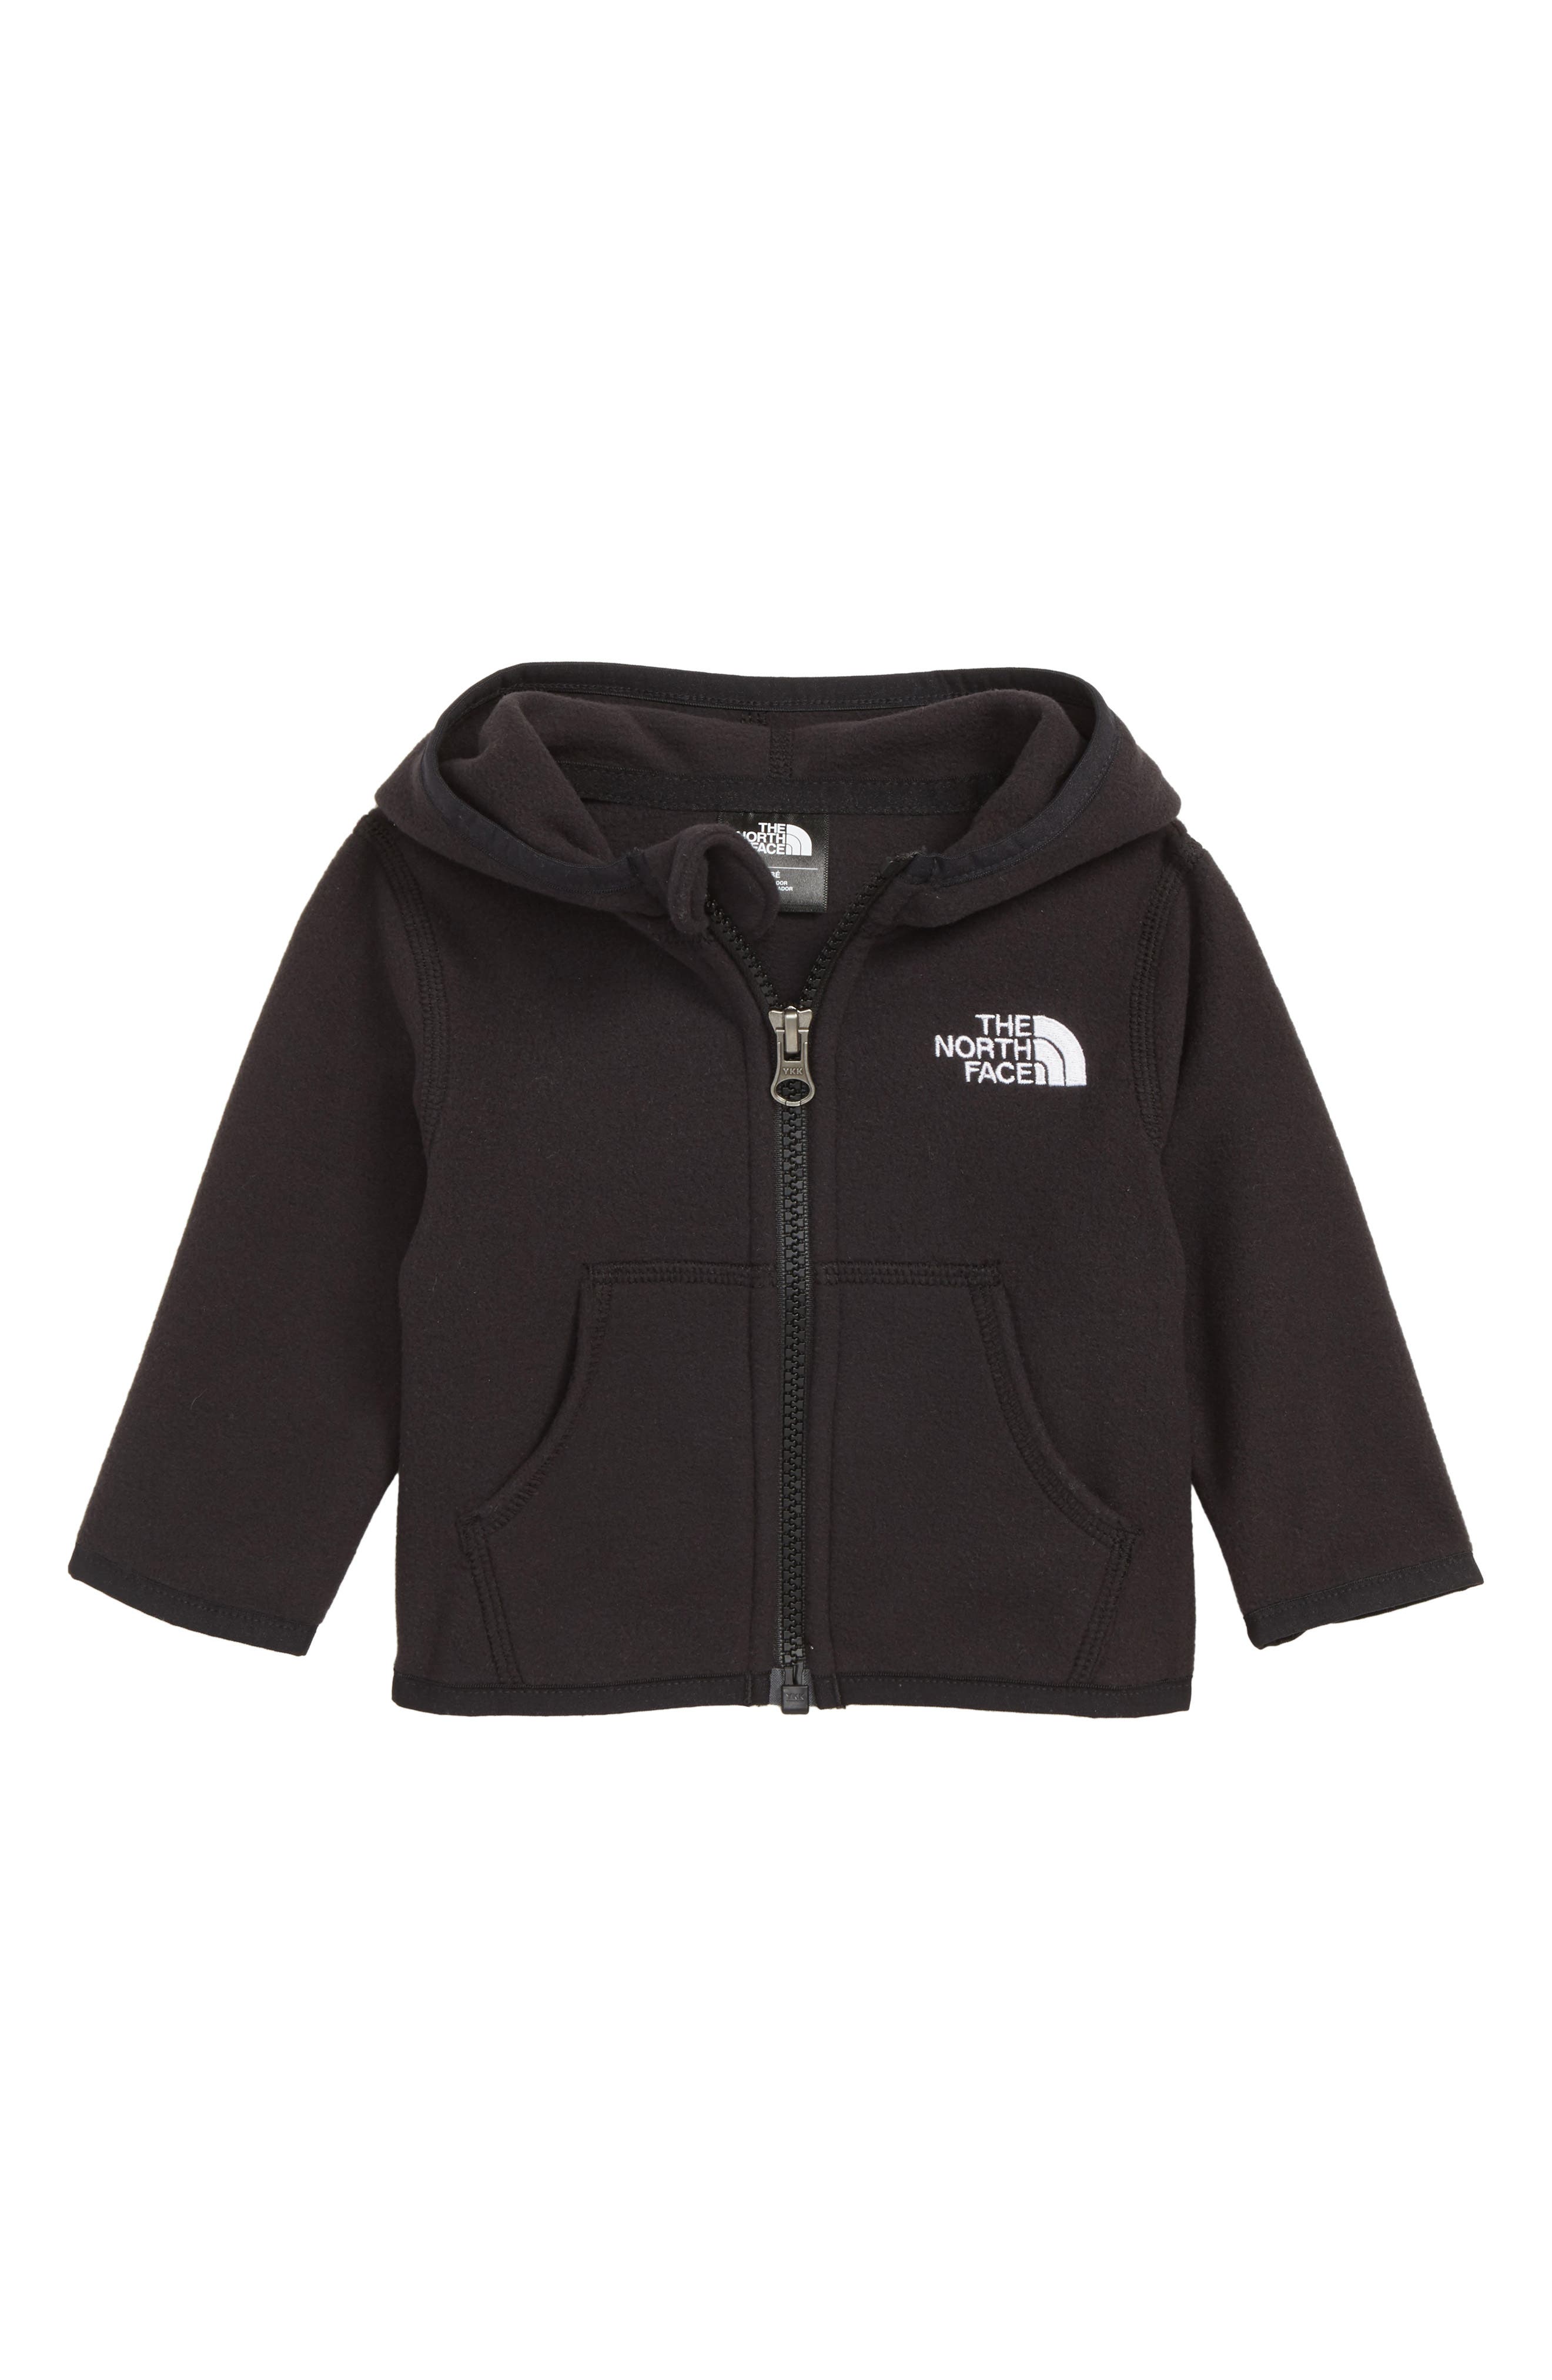 north face baby sweater